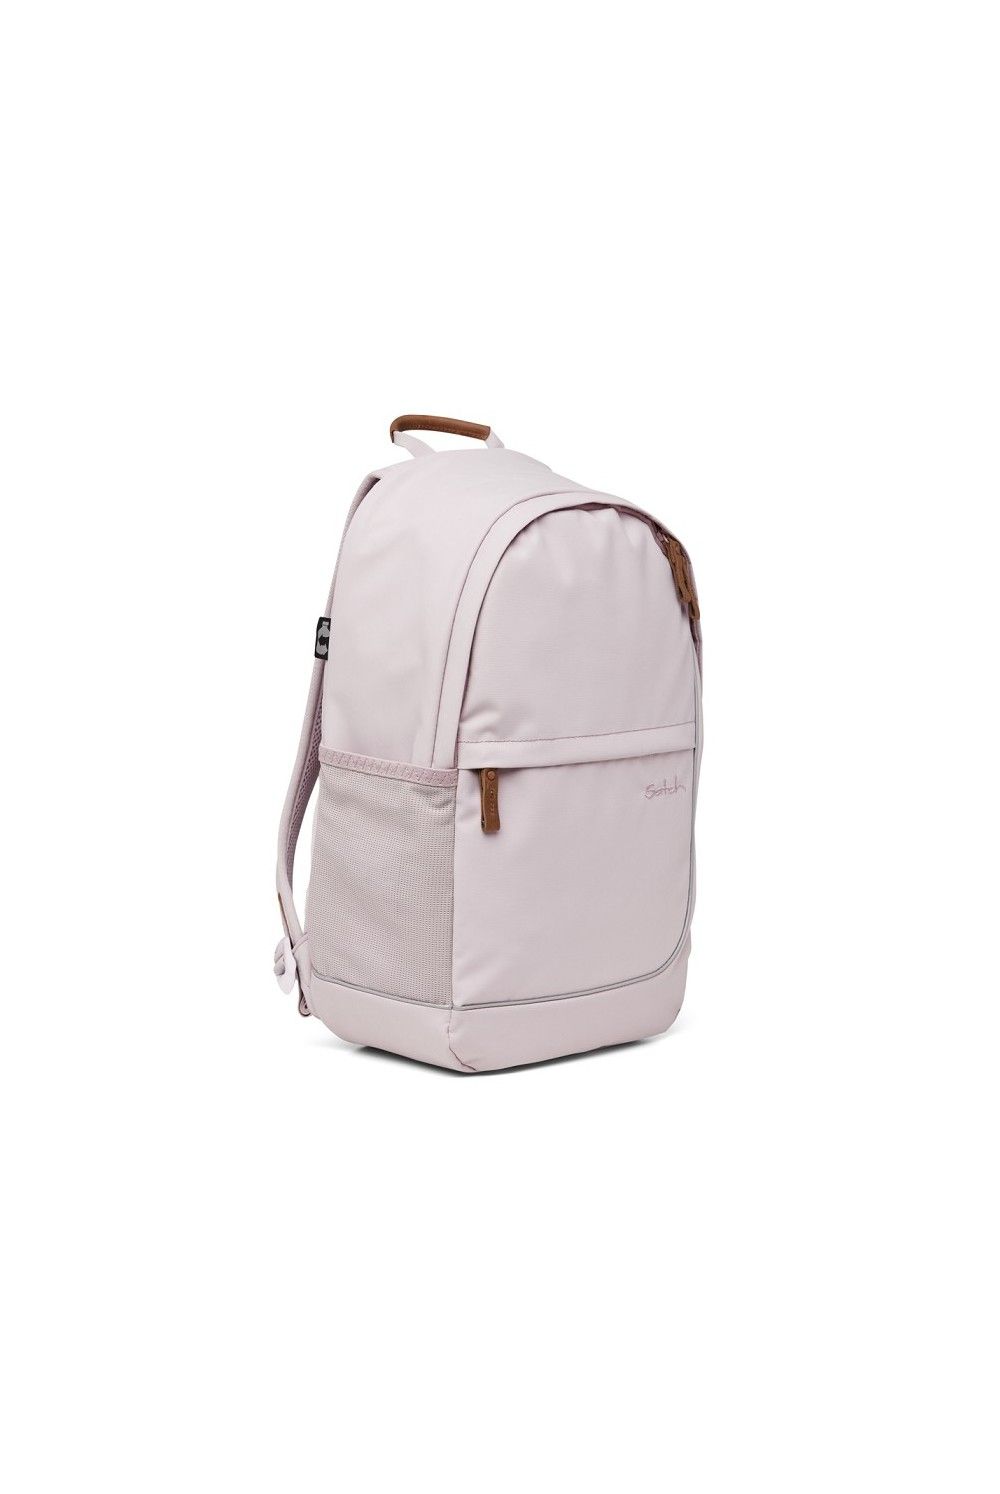 Sac à dos scolaire Satch Fly Nordic Rose